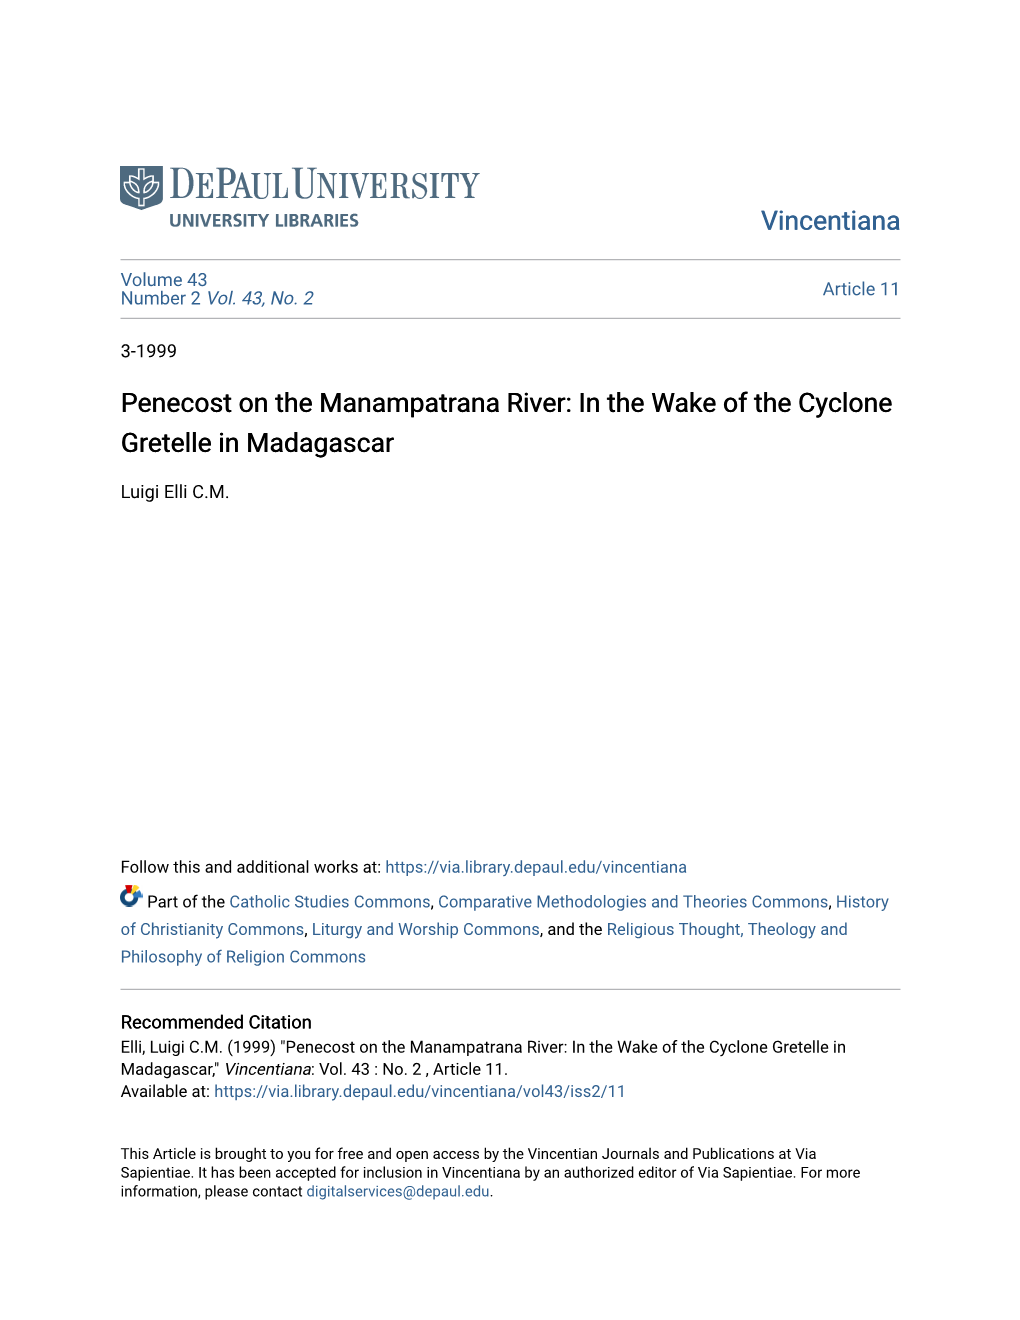 Penecost on the Manampatrana River: in the Wake of the Cyclone Gretelle in Madagascar